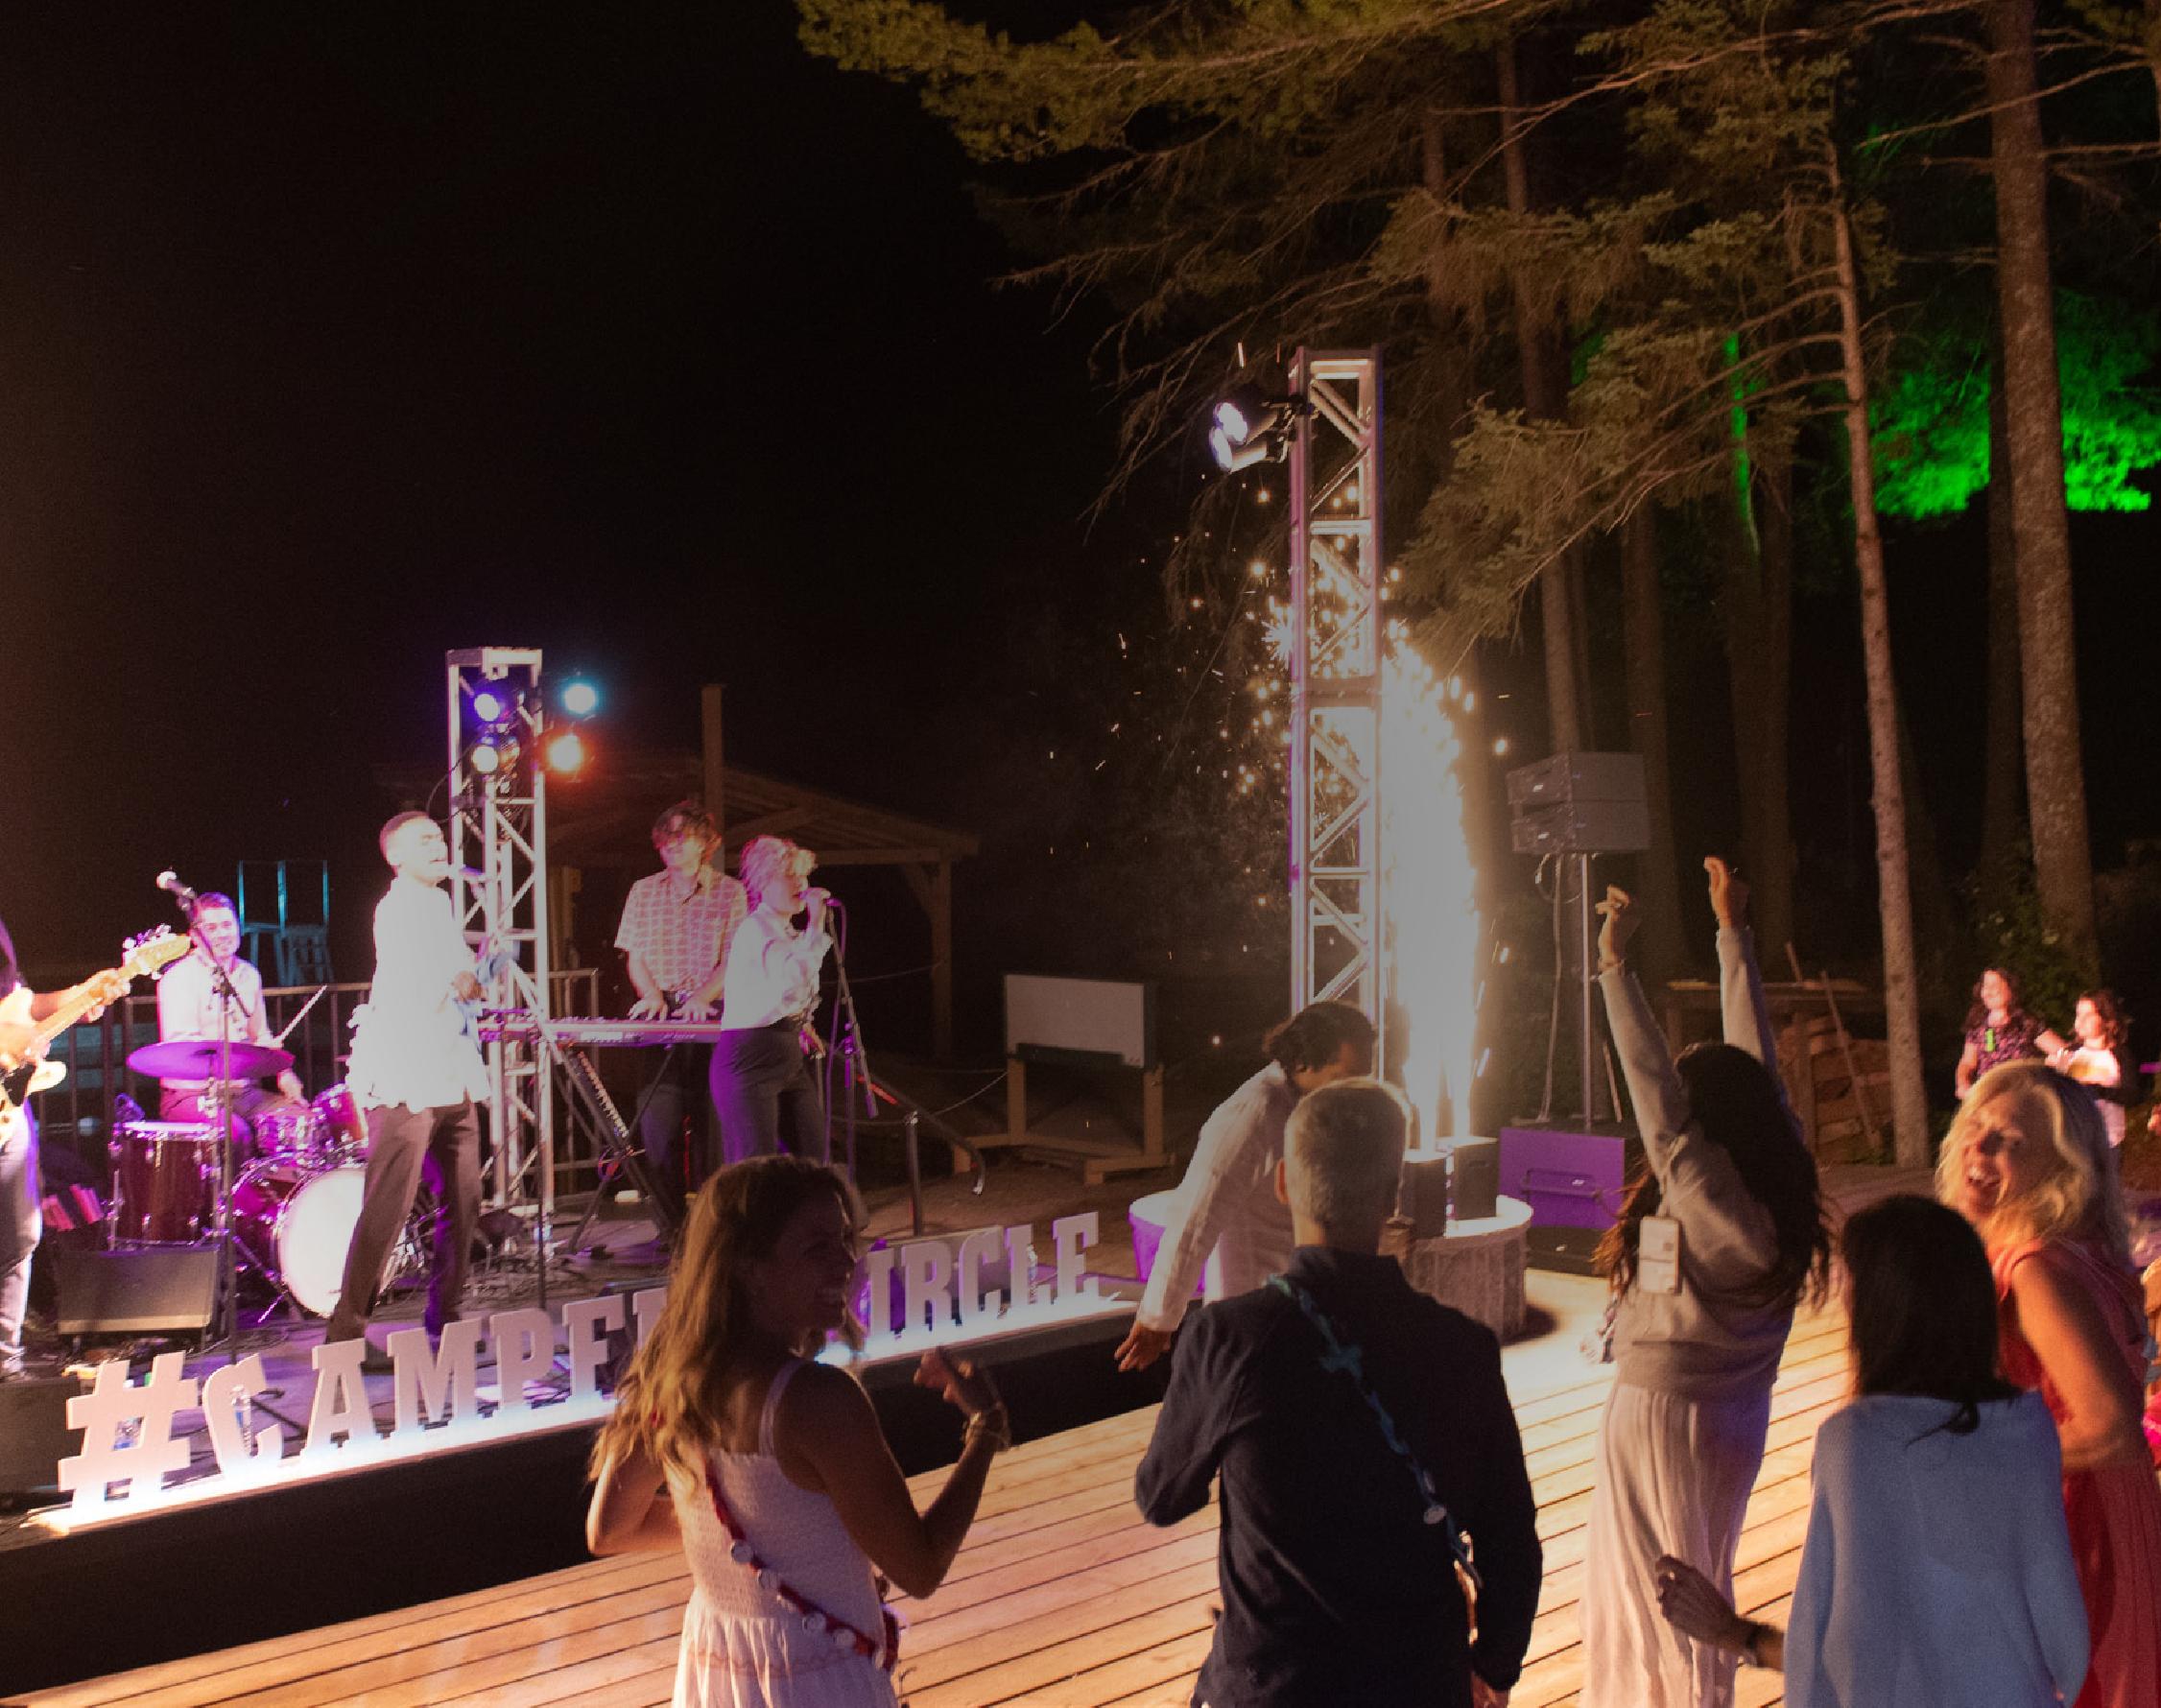 band performing on stage at night at camp